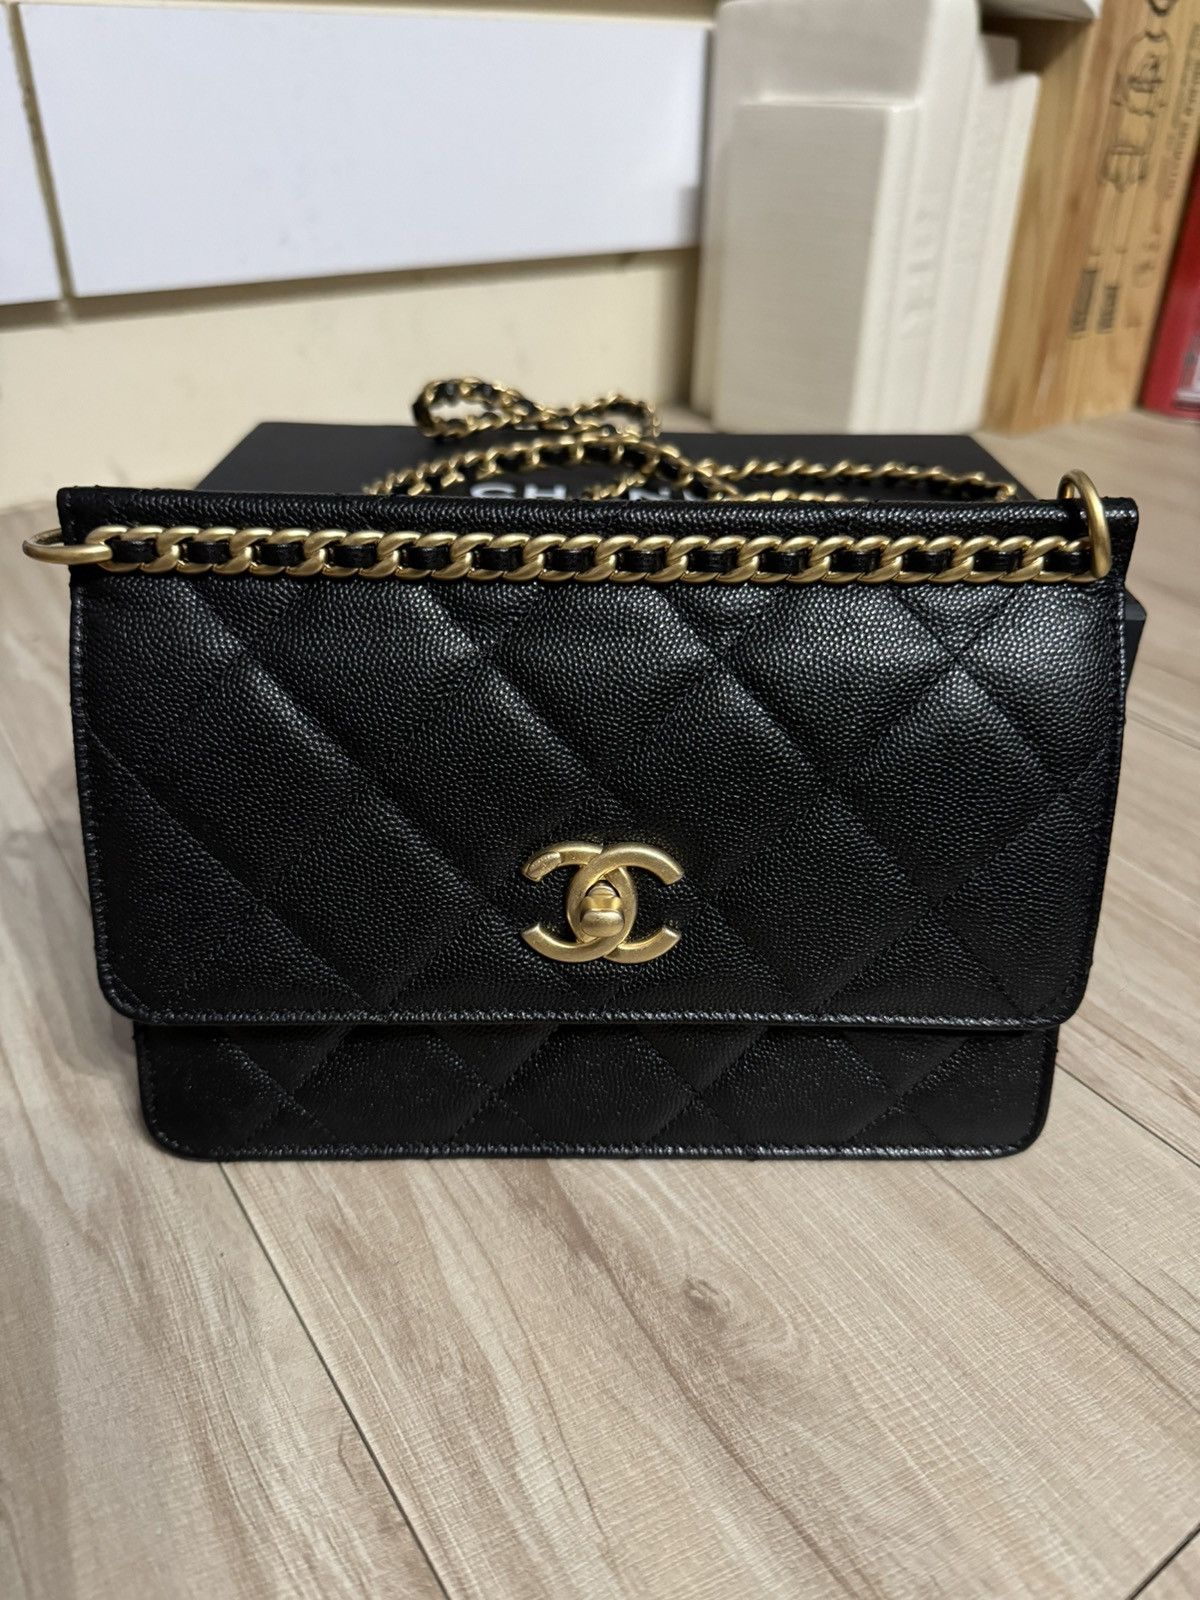 Chanel Chanel 23A 2022/23 Métiers d’art collection Small Flap Bag | Grailed